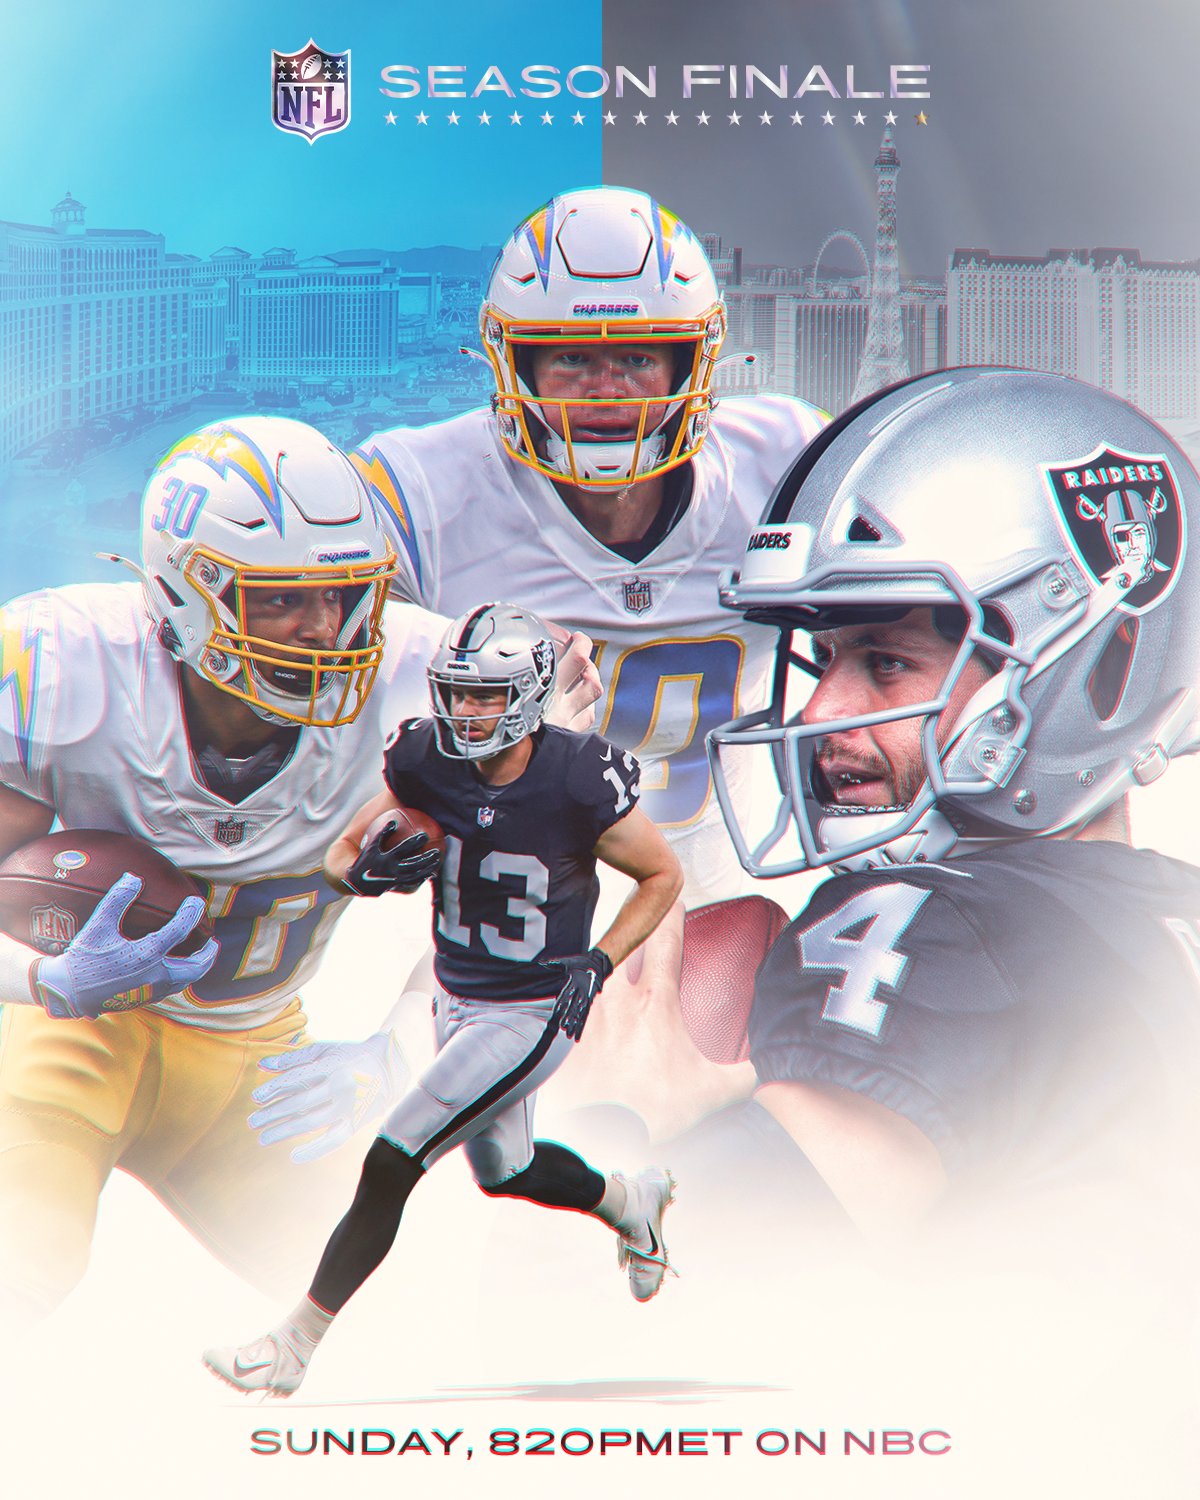 NFL on X: 'One game for a playoff spot. Who will win? #NFLSeasonFinale @ Chargers  @Raiders 